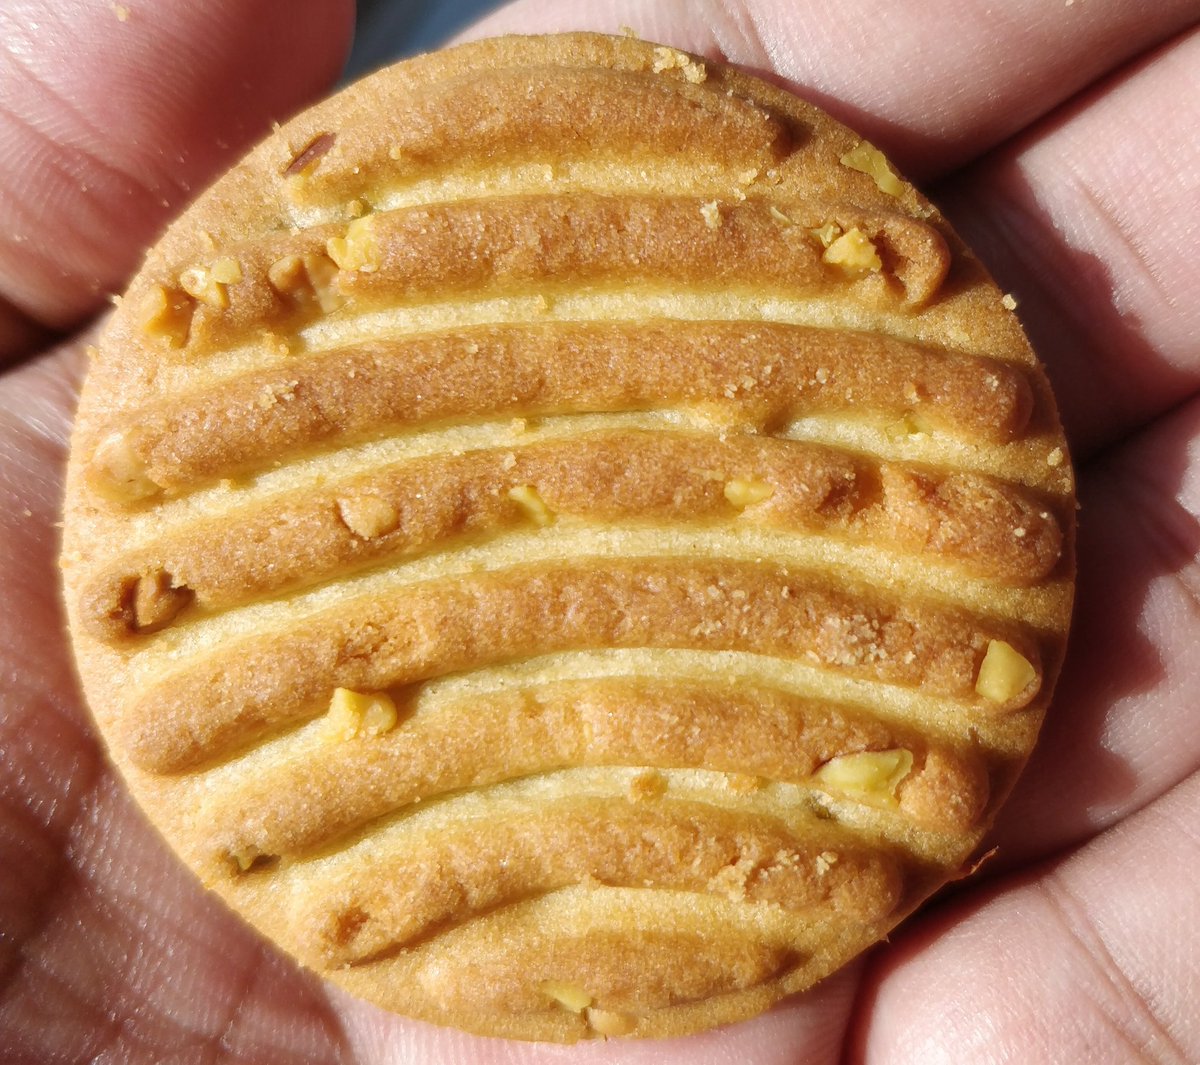 I offered a Good Day biscuit to my colleague and he exclaimed 'Spotify!'. Now I can't unsee it.